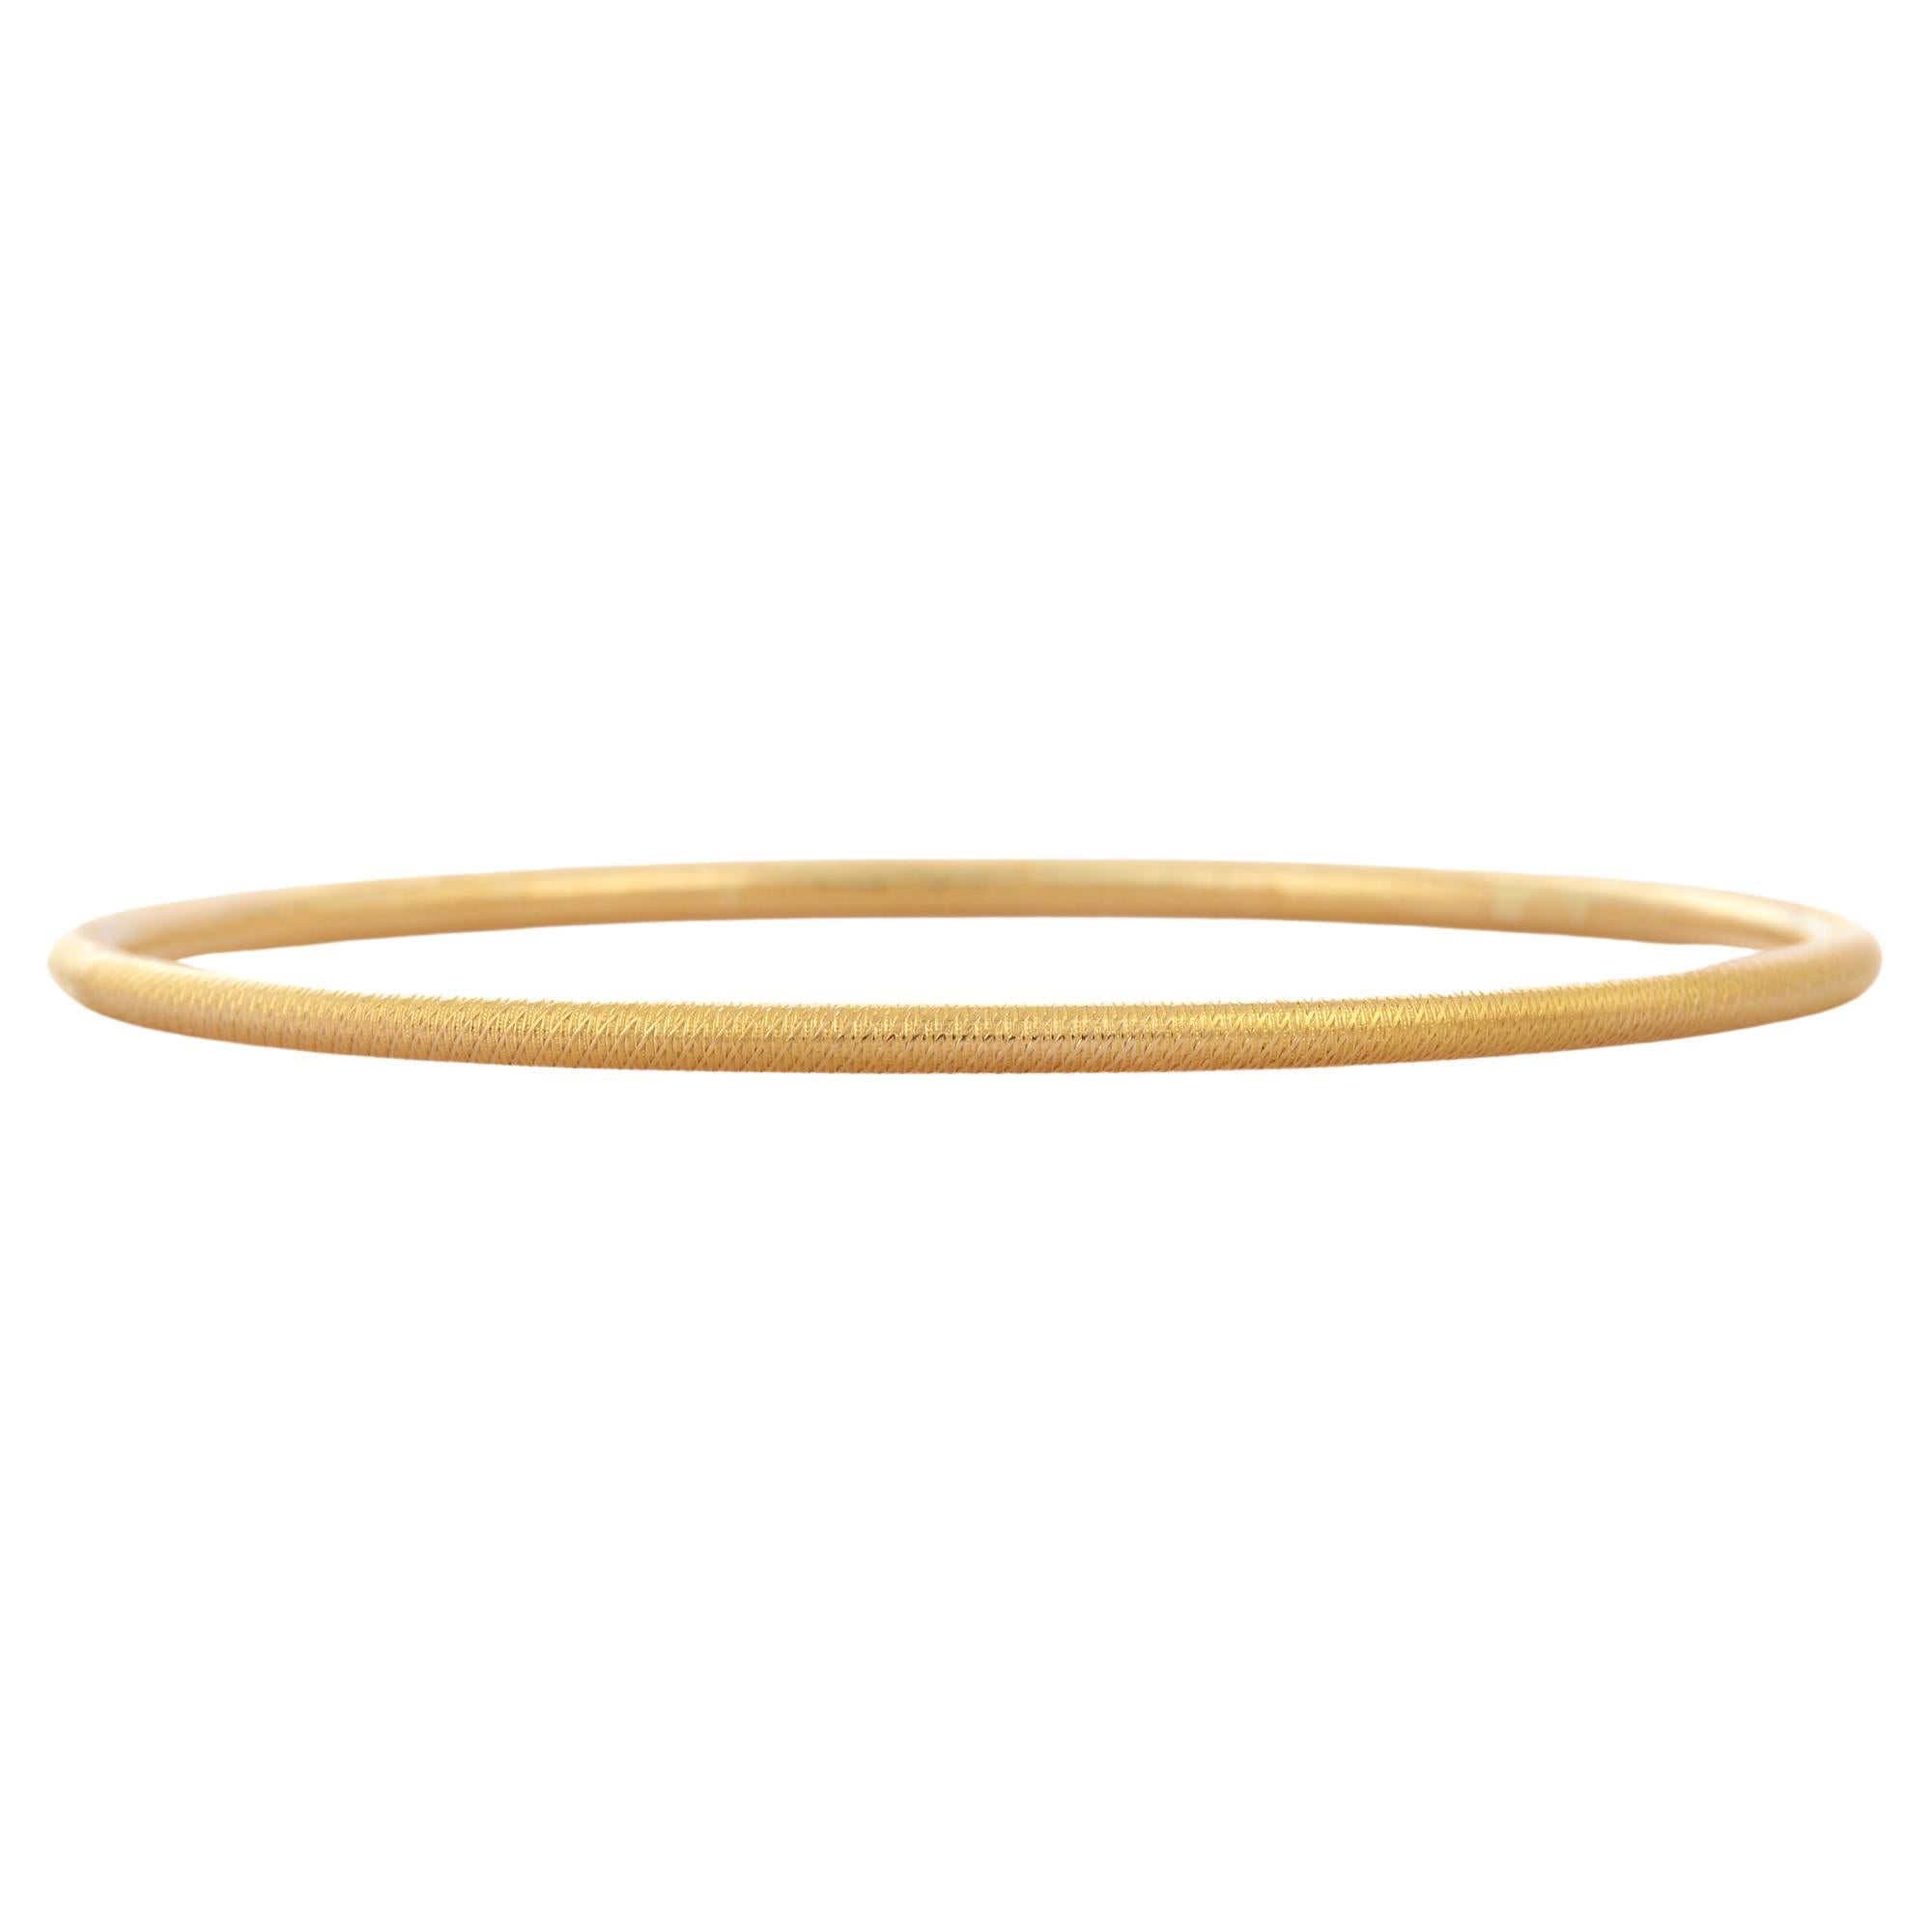 18K Solid Yellow Gold Simple Unisex Gold Bangle 